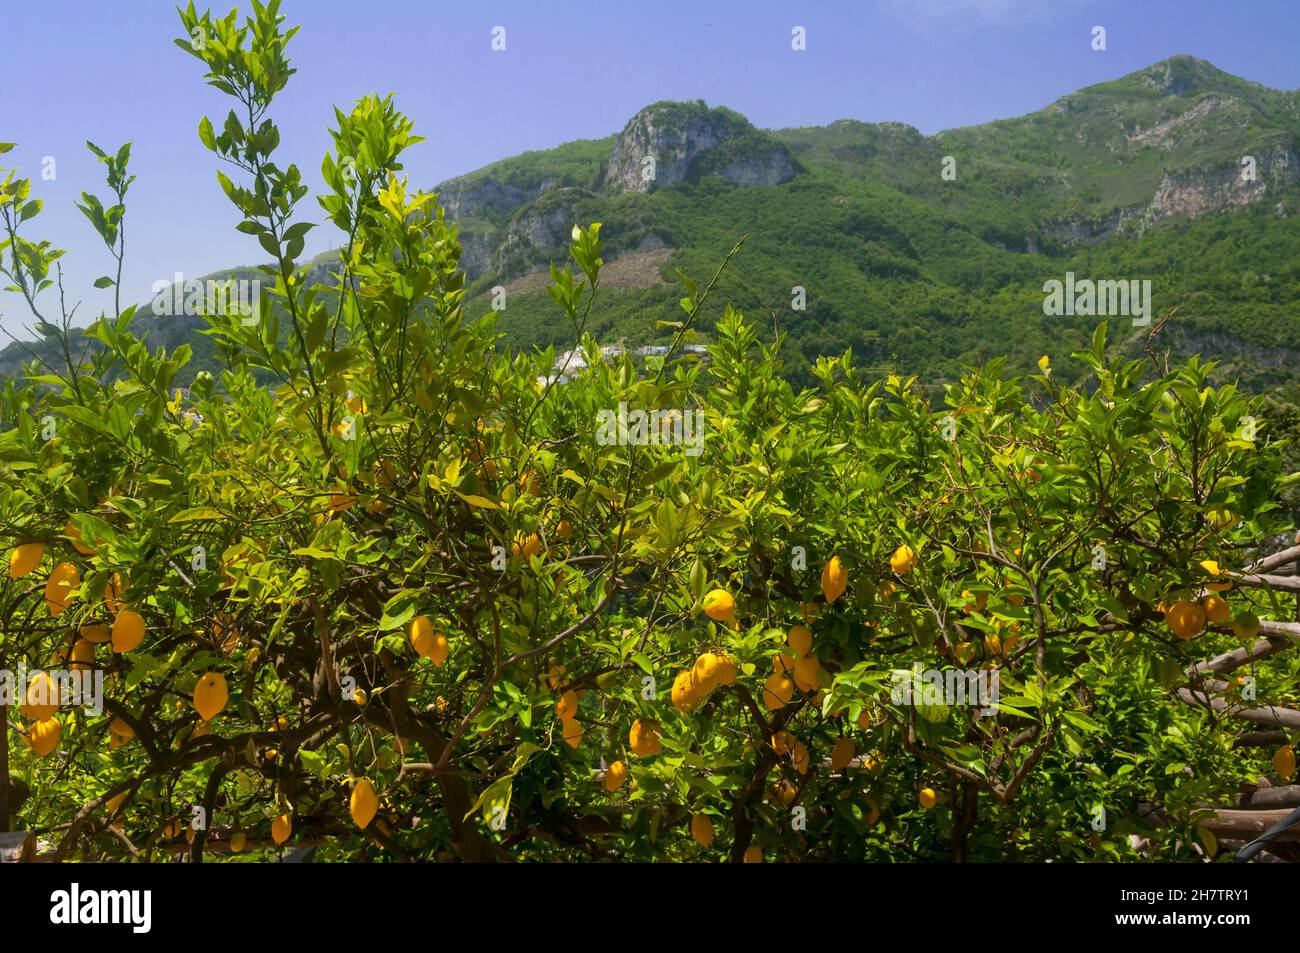 Ripe fruit ready for picking in an orchard near Scala, the Amalfi Coast. These juicy lemons are mostly used for making the famous liqueur, Limoncello. Stock Photo